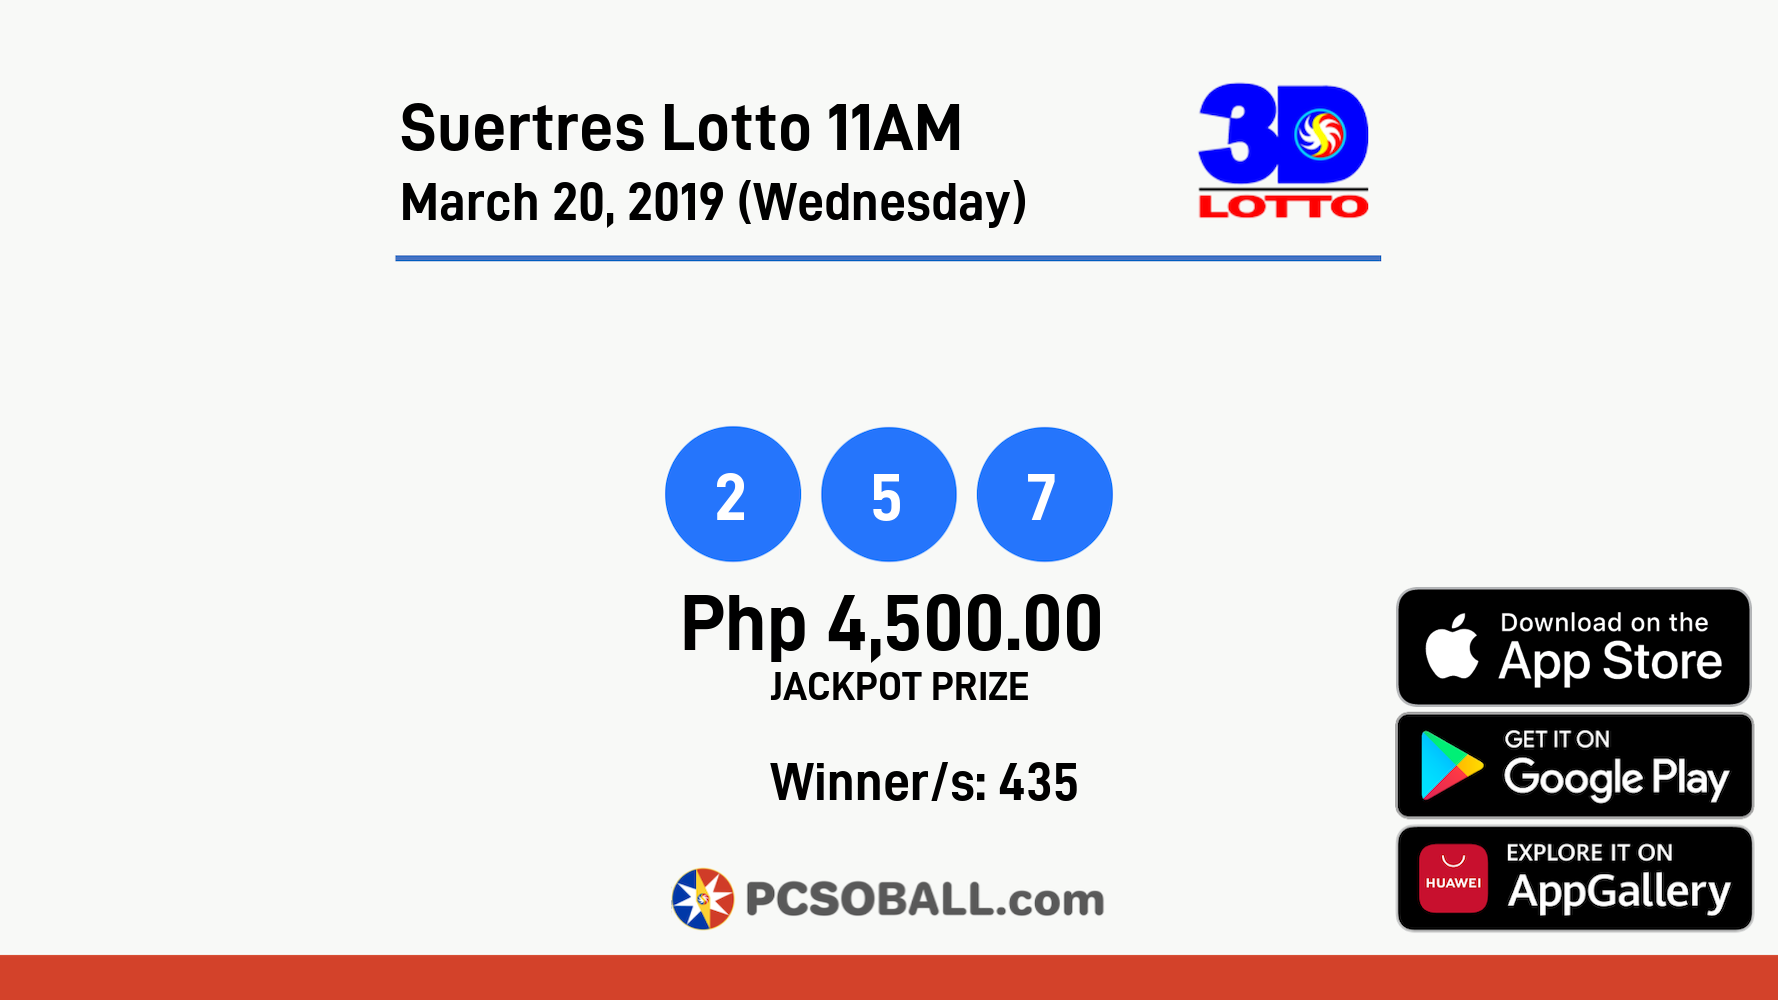 Suertres Lotto 11AM March 20, 2019 (Wednesday) Result